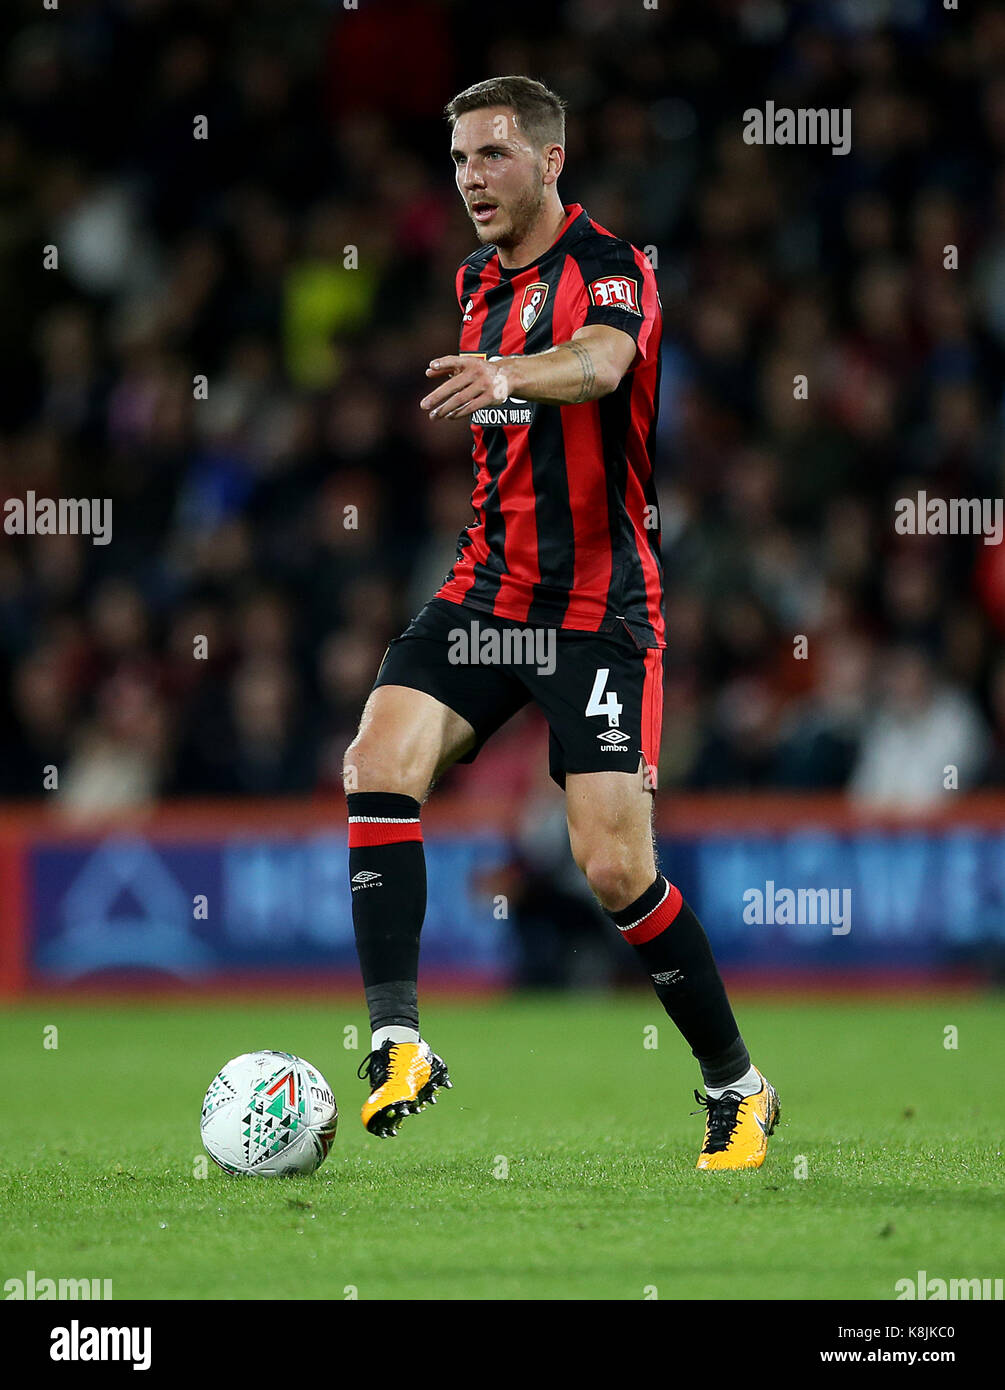 AFC Bournemouth Dan Gosling in action during the Carabao Cup, third round match at the Vitality Stadium, Bournemouth. PRESS ASSOCIATION Photo. Picture date: Tuesday September 19, 2017. See PA story SOCCER Bournemouth. Photo credit should read: Steven Paston/PA Wire. RESTRICTIONS: No use with unauthorised audio, video, data, fixture lists, club/league logos or 'live' services. Online in-match use limited to 75 images, no video emulation. No use in betting, games or single club/league/player publications. Stock Photo